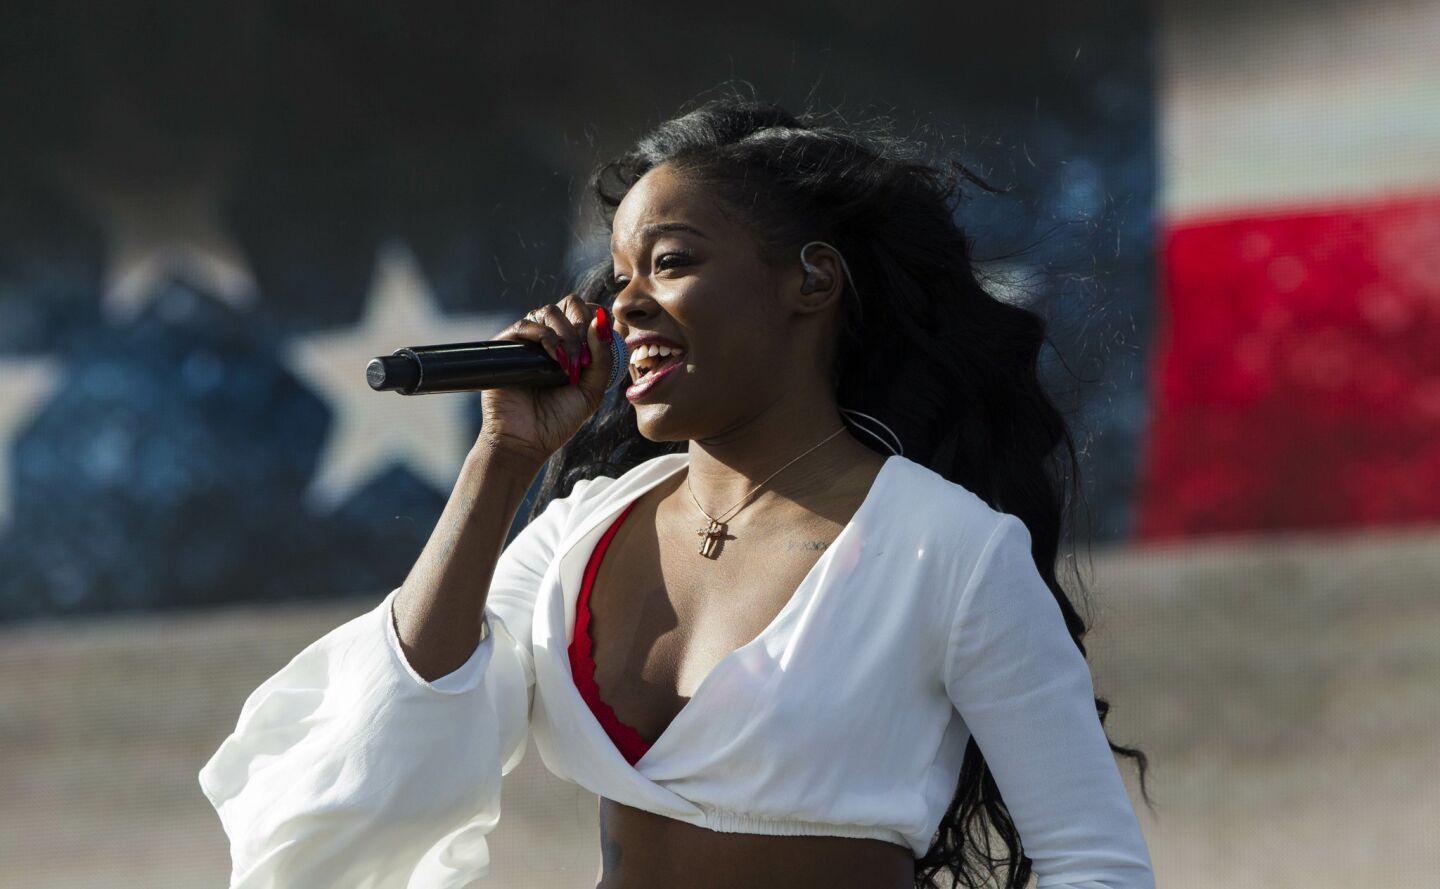 The 2015 Coachella Valley Music and Arts Festival gets underway.Azealia Banks during her set on the Coachella Stage Friday.